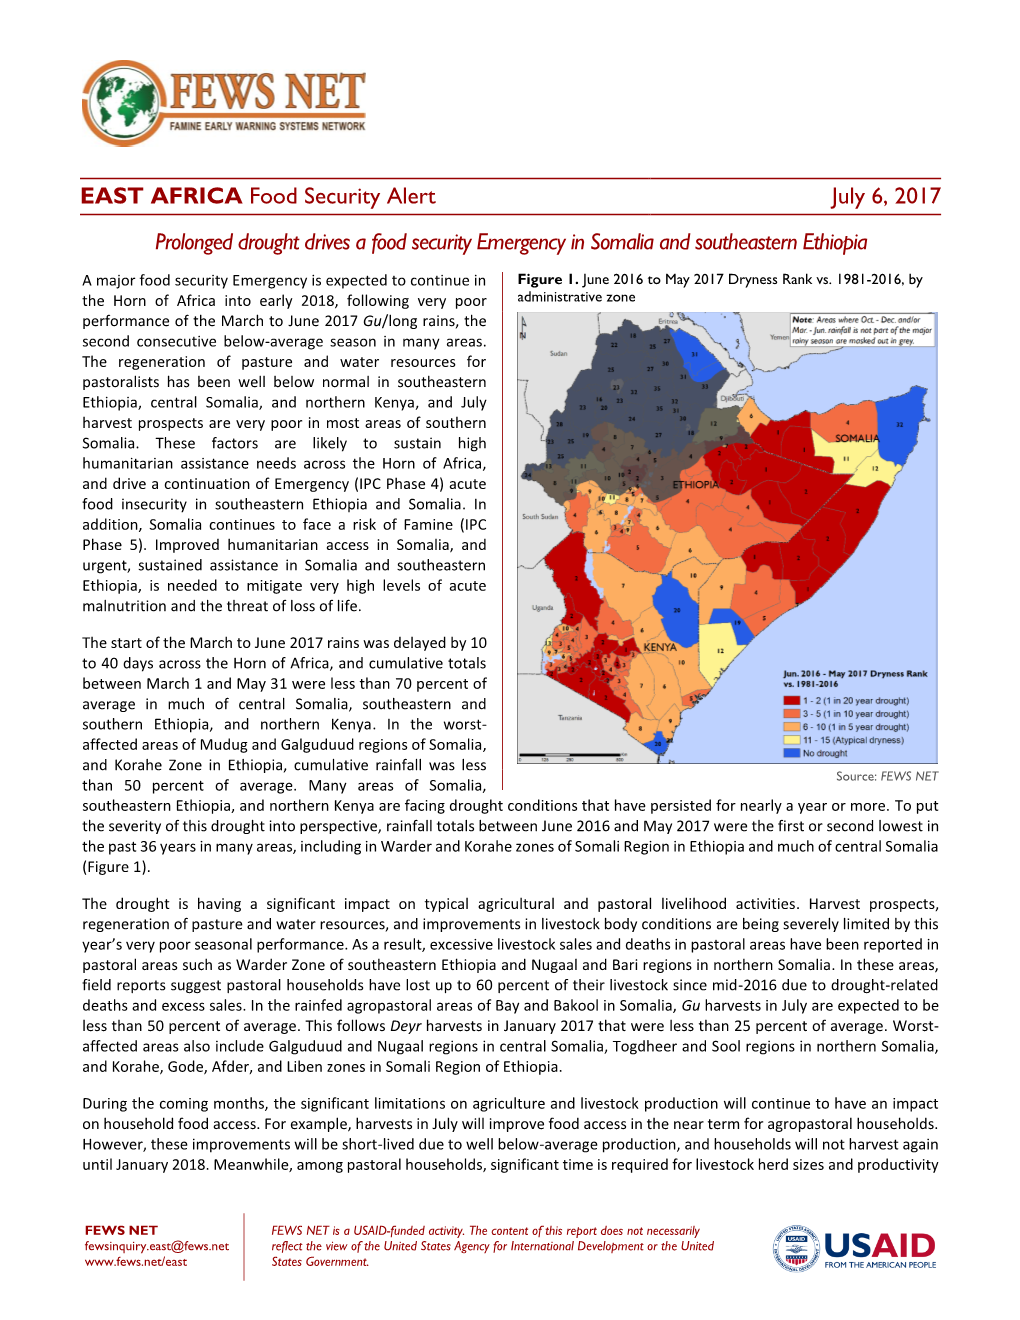 Food Security Alert July 6, 2017 Prolonged Drought Drives a Food Security Emergency in Somalia and Southeastern Ethiopia